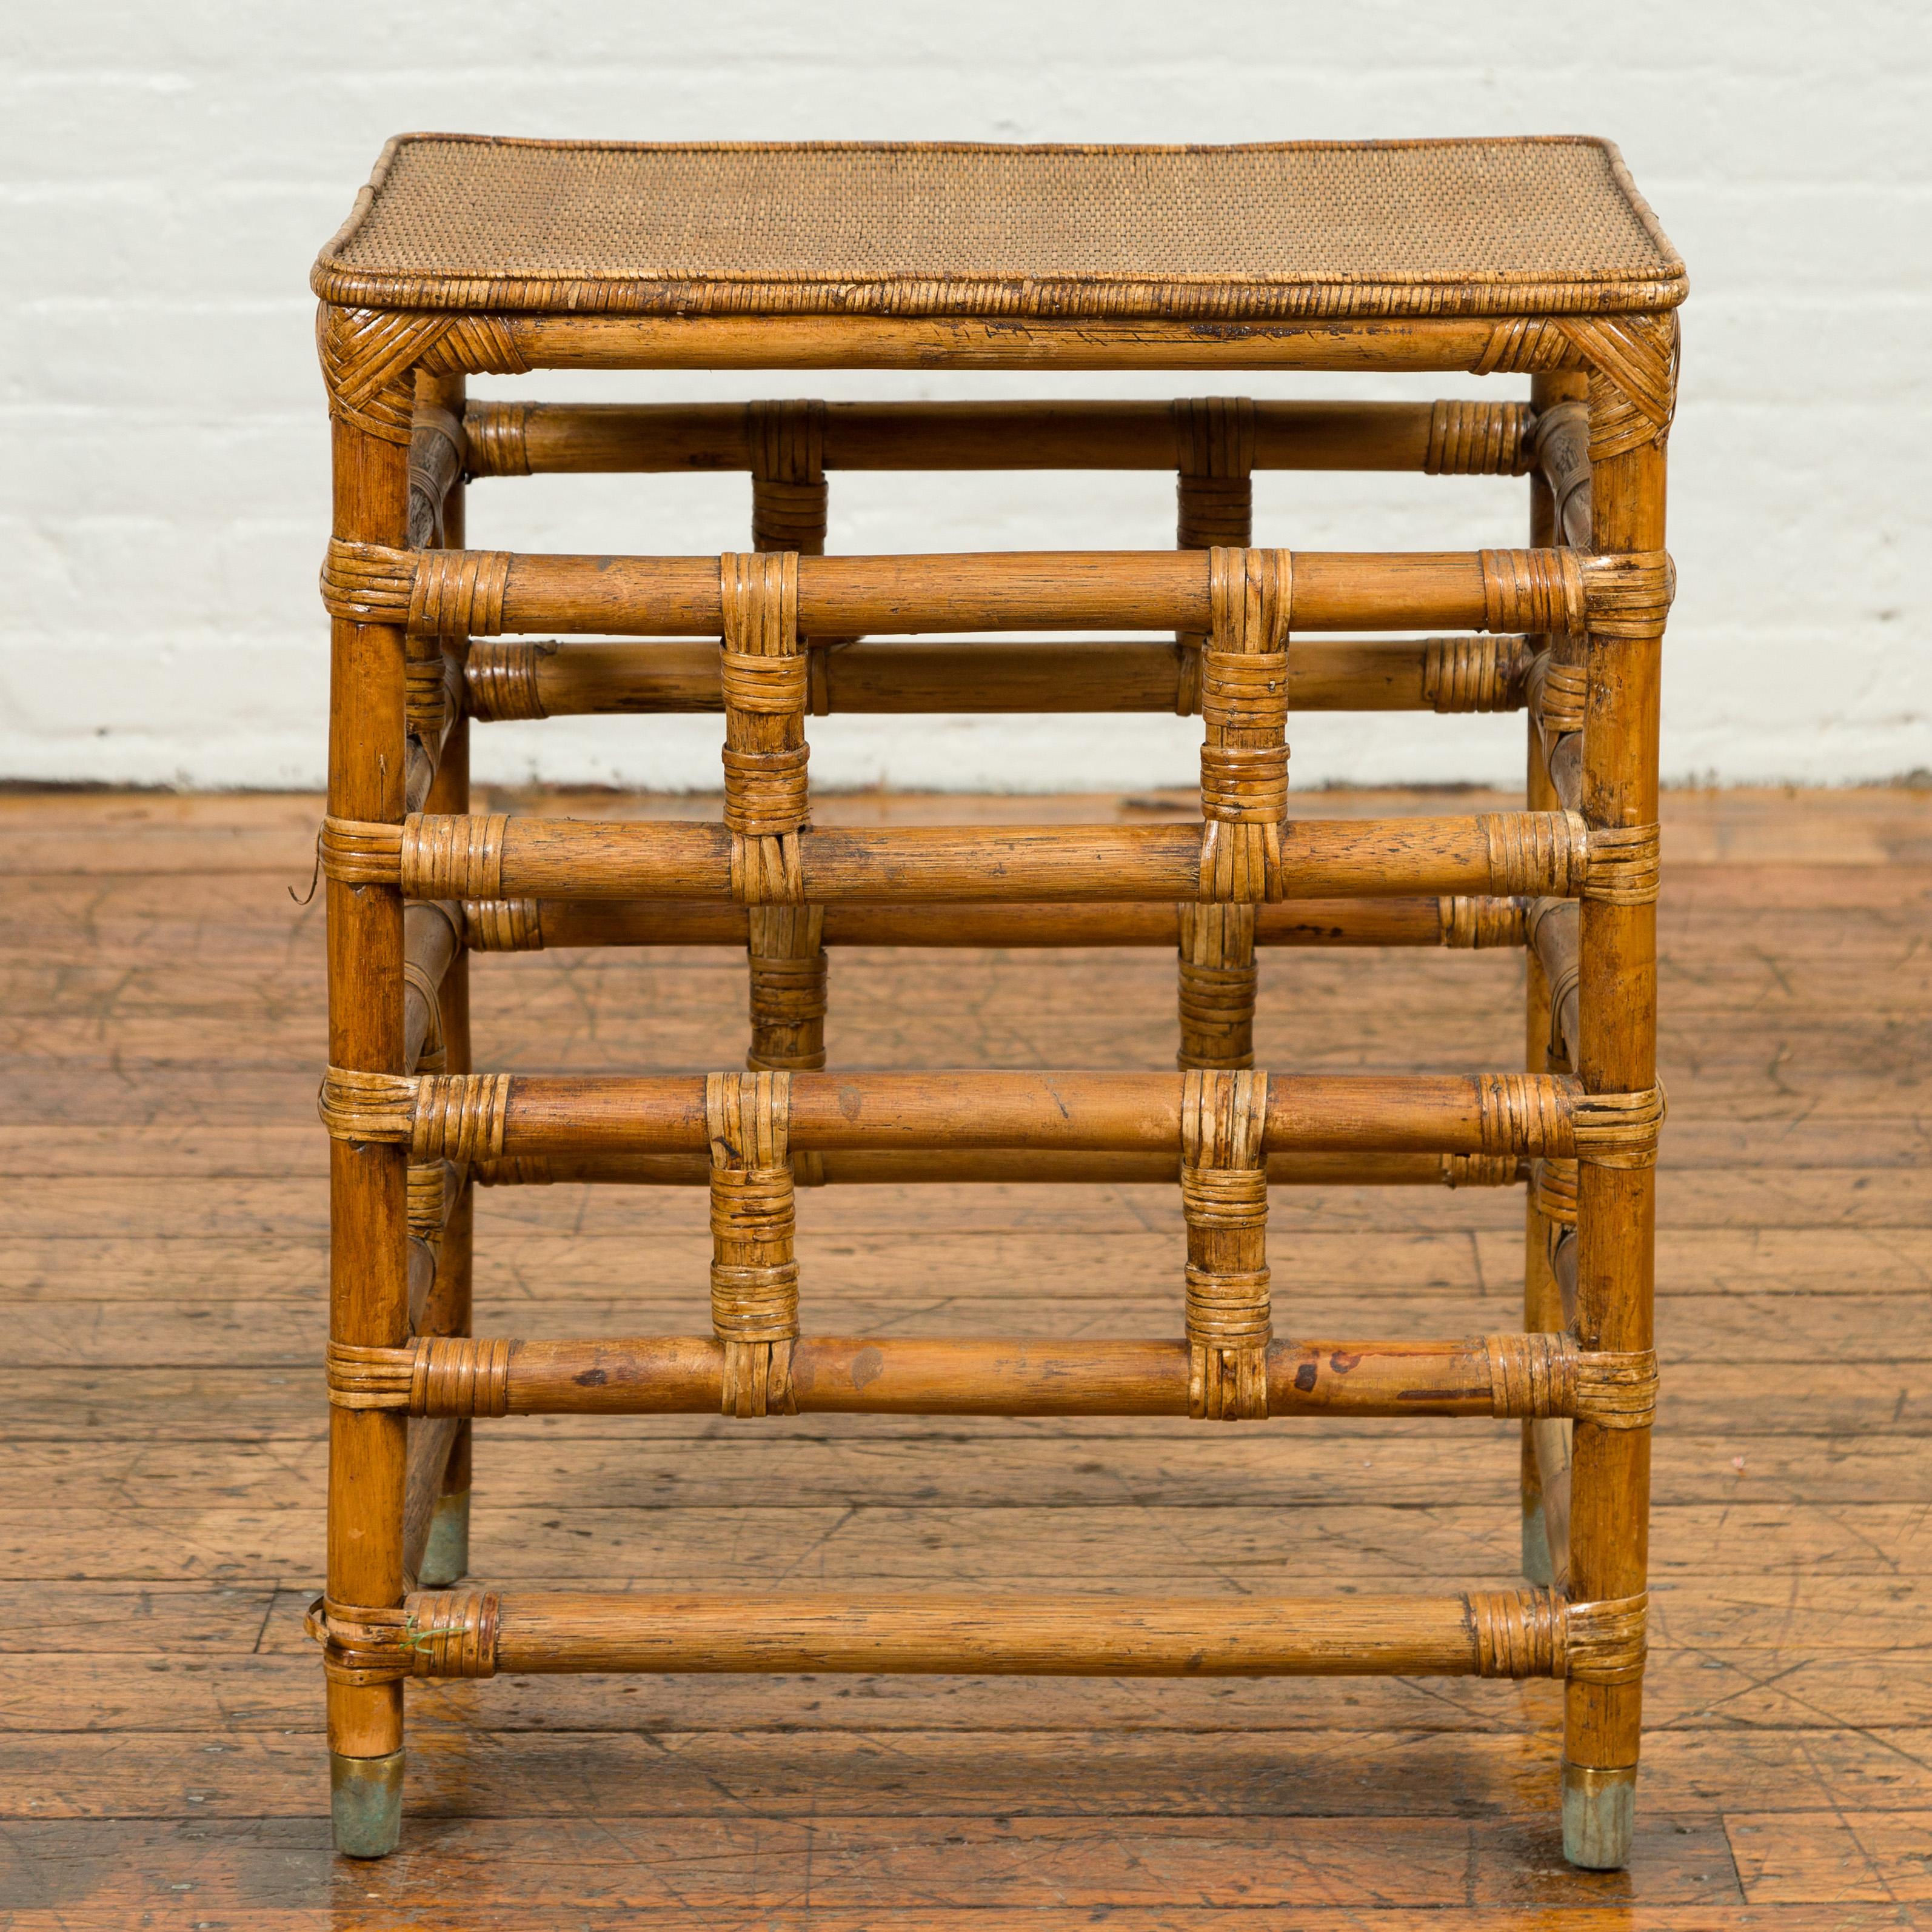 A vintage Burmese bamboo side table from the mid-20th century, with rattan top. Born in Myanmar during the midcentury period, this stylish side table features a linear silhouette made of a geometrically organized bamboo base. Presenting a rattan